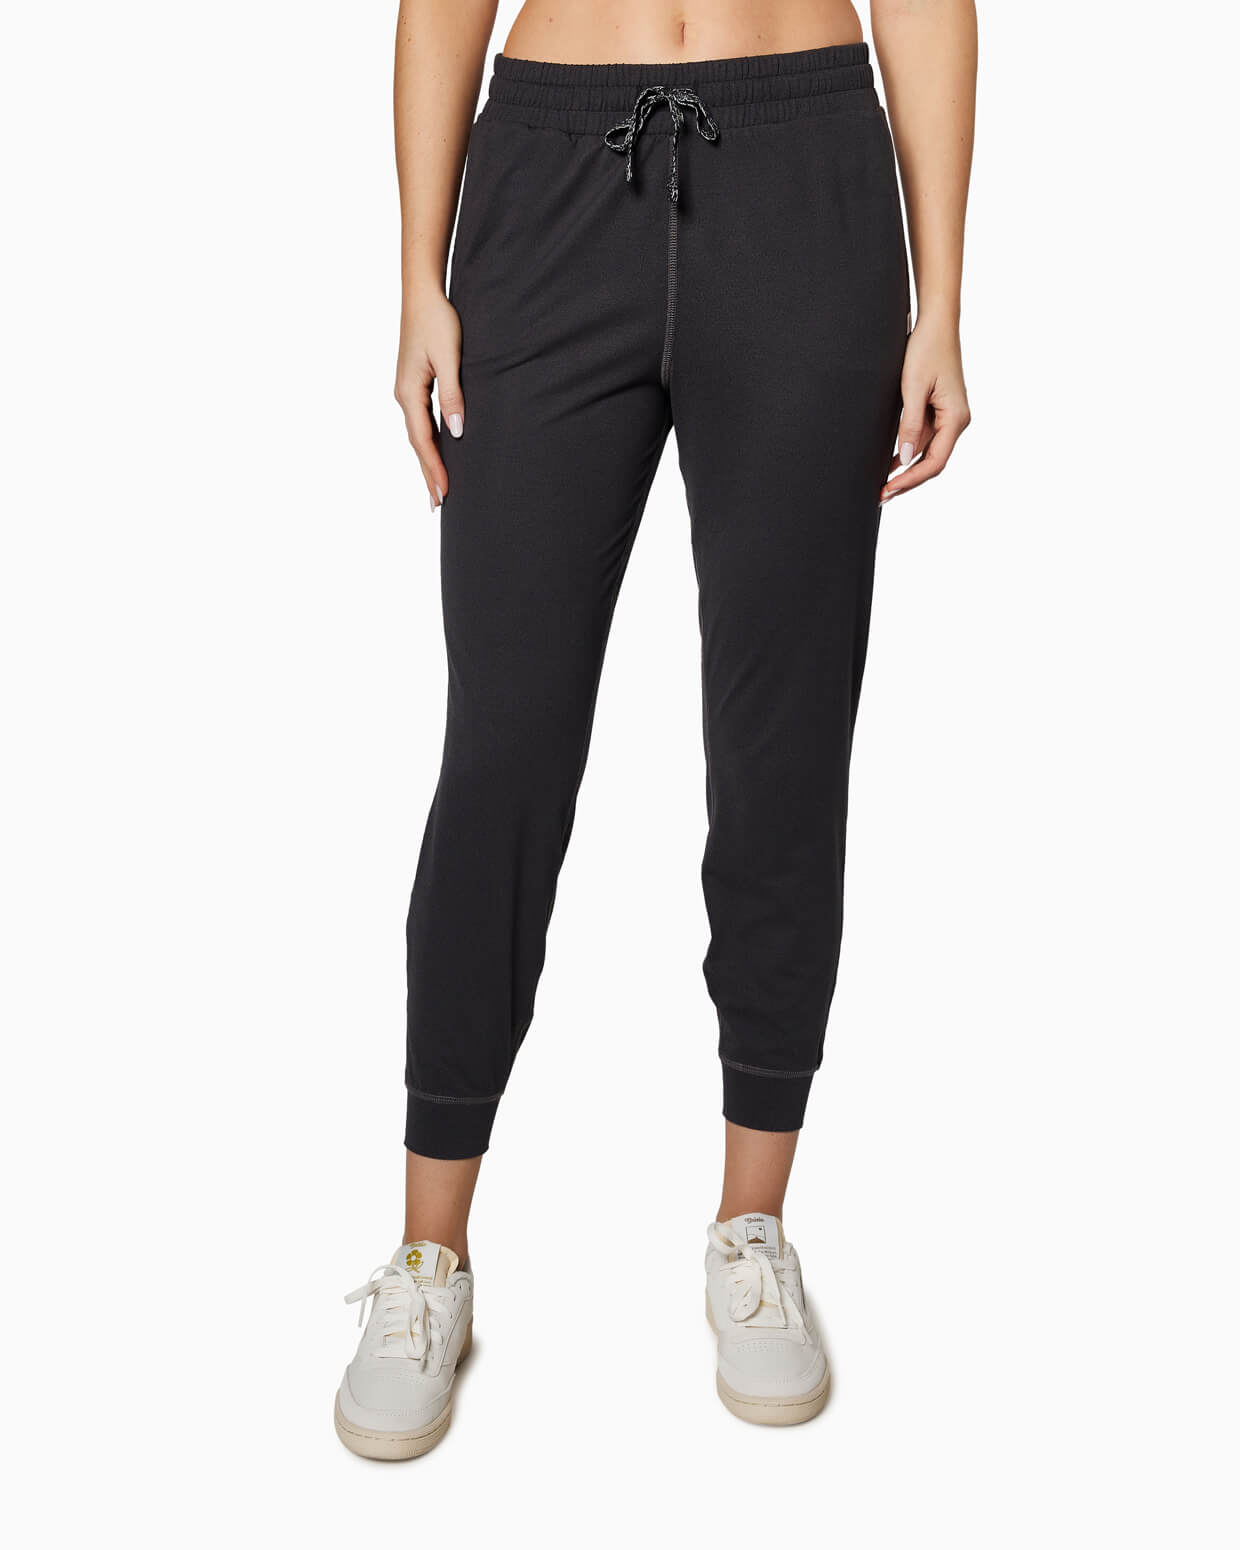 Canada Roots Yoga Capris With Pocket Tracker For Women Workout Joggers,  Running Aeropostale Sweatpants, And Sportswear Outfit Original272i From  Sadfk, $35.9